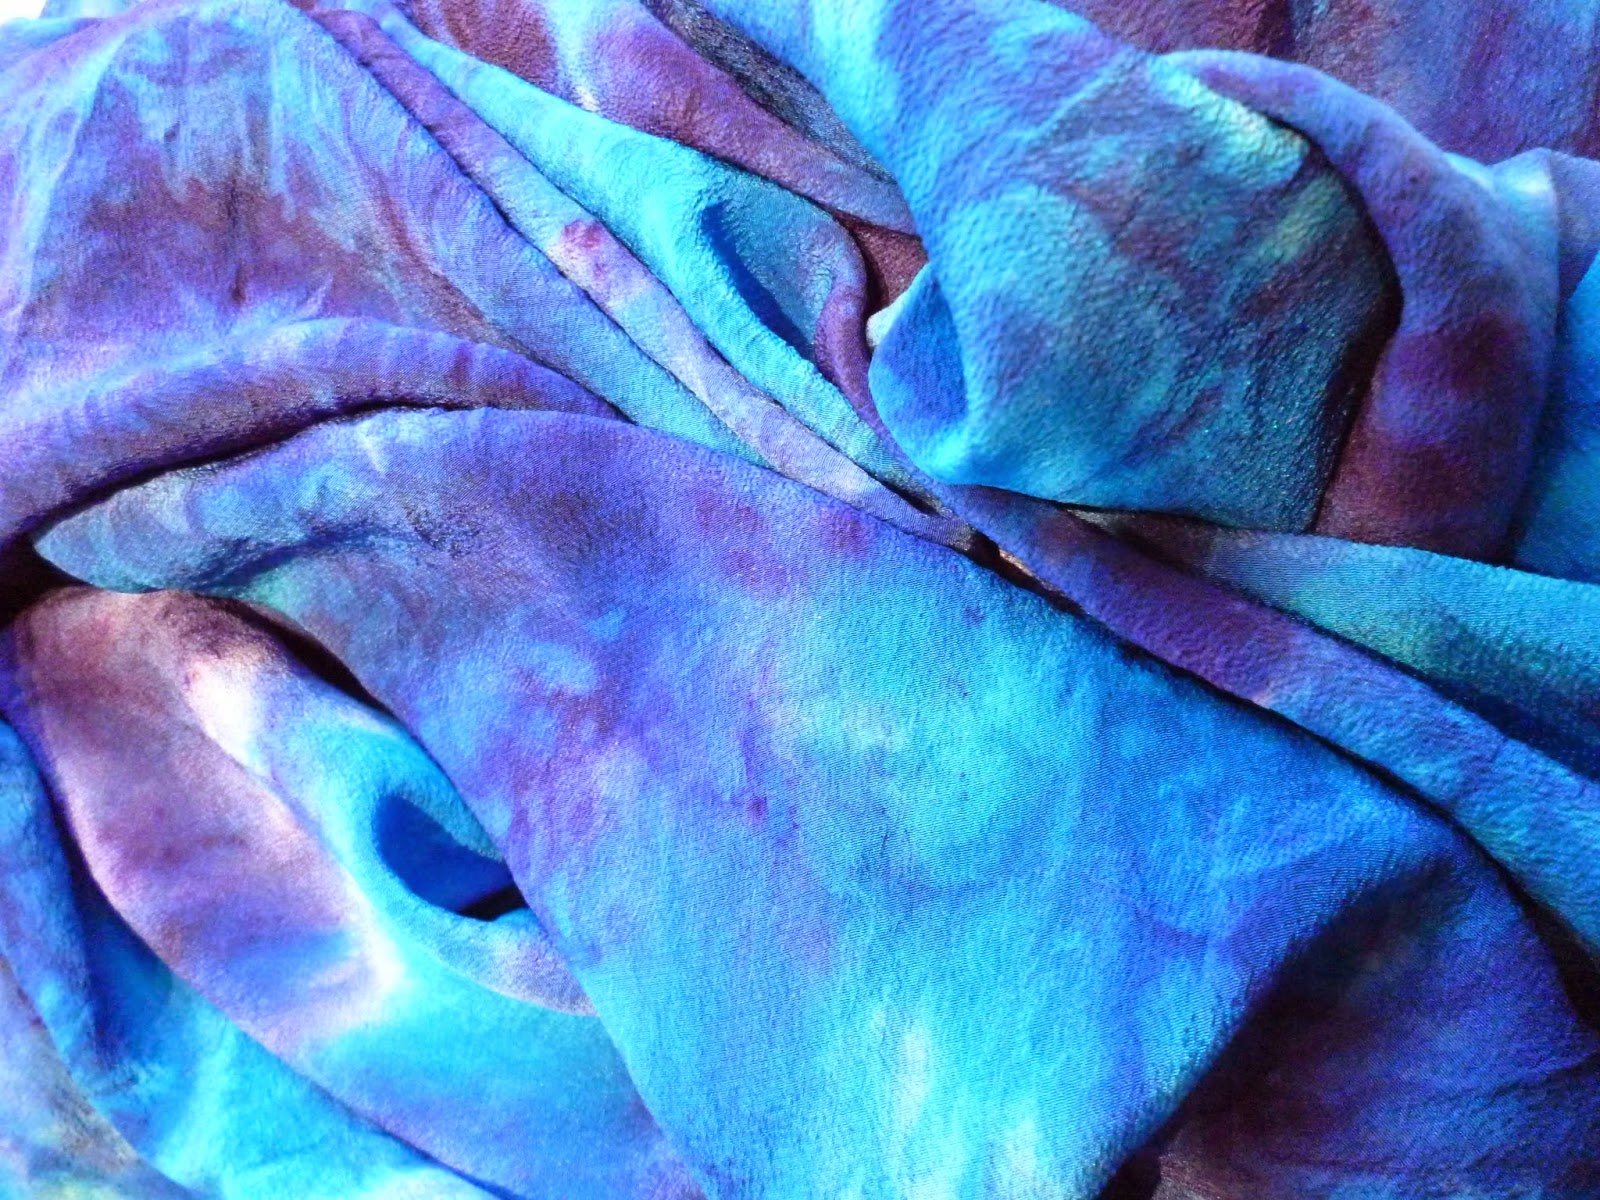 sew sew art: Acid dyeing with Grace